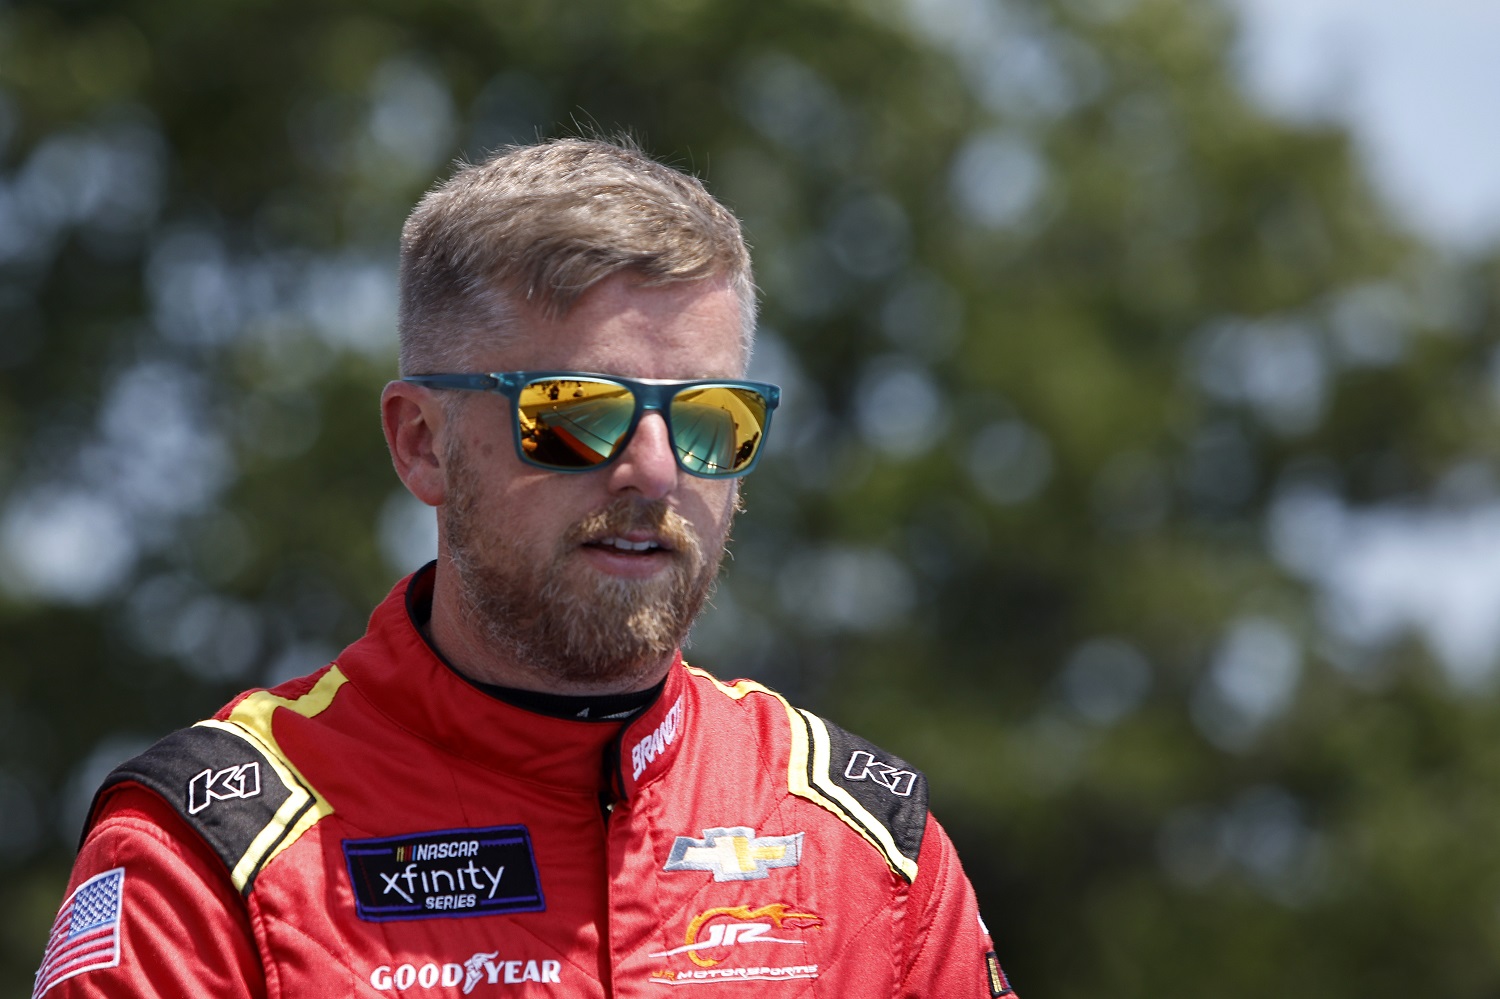 Justin Allgaier prior to the NASCAR Xfinity Series Henry 180 at Road America on July 2, 2022 in Elkhart Lake, Wisconsin. | Sean Gardner/Getty Images